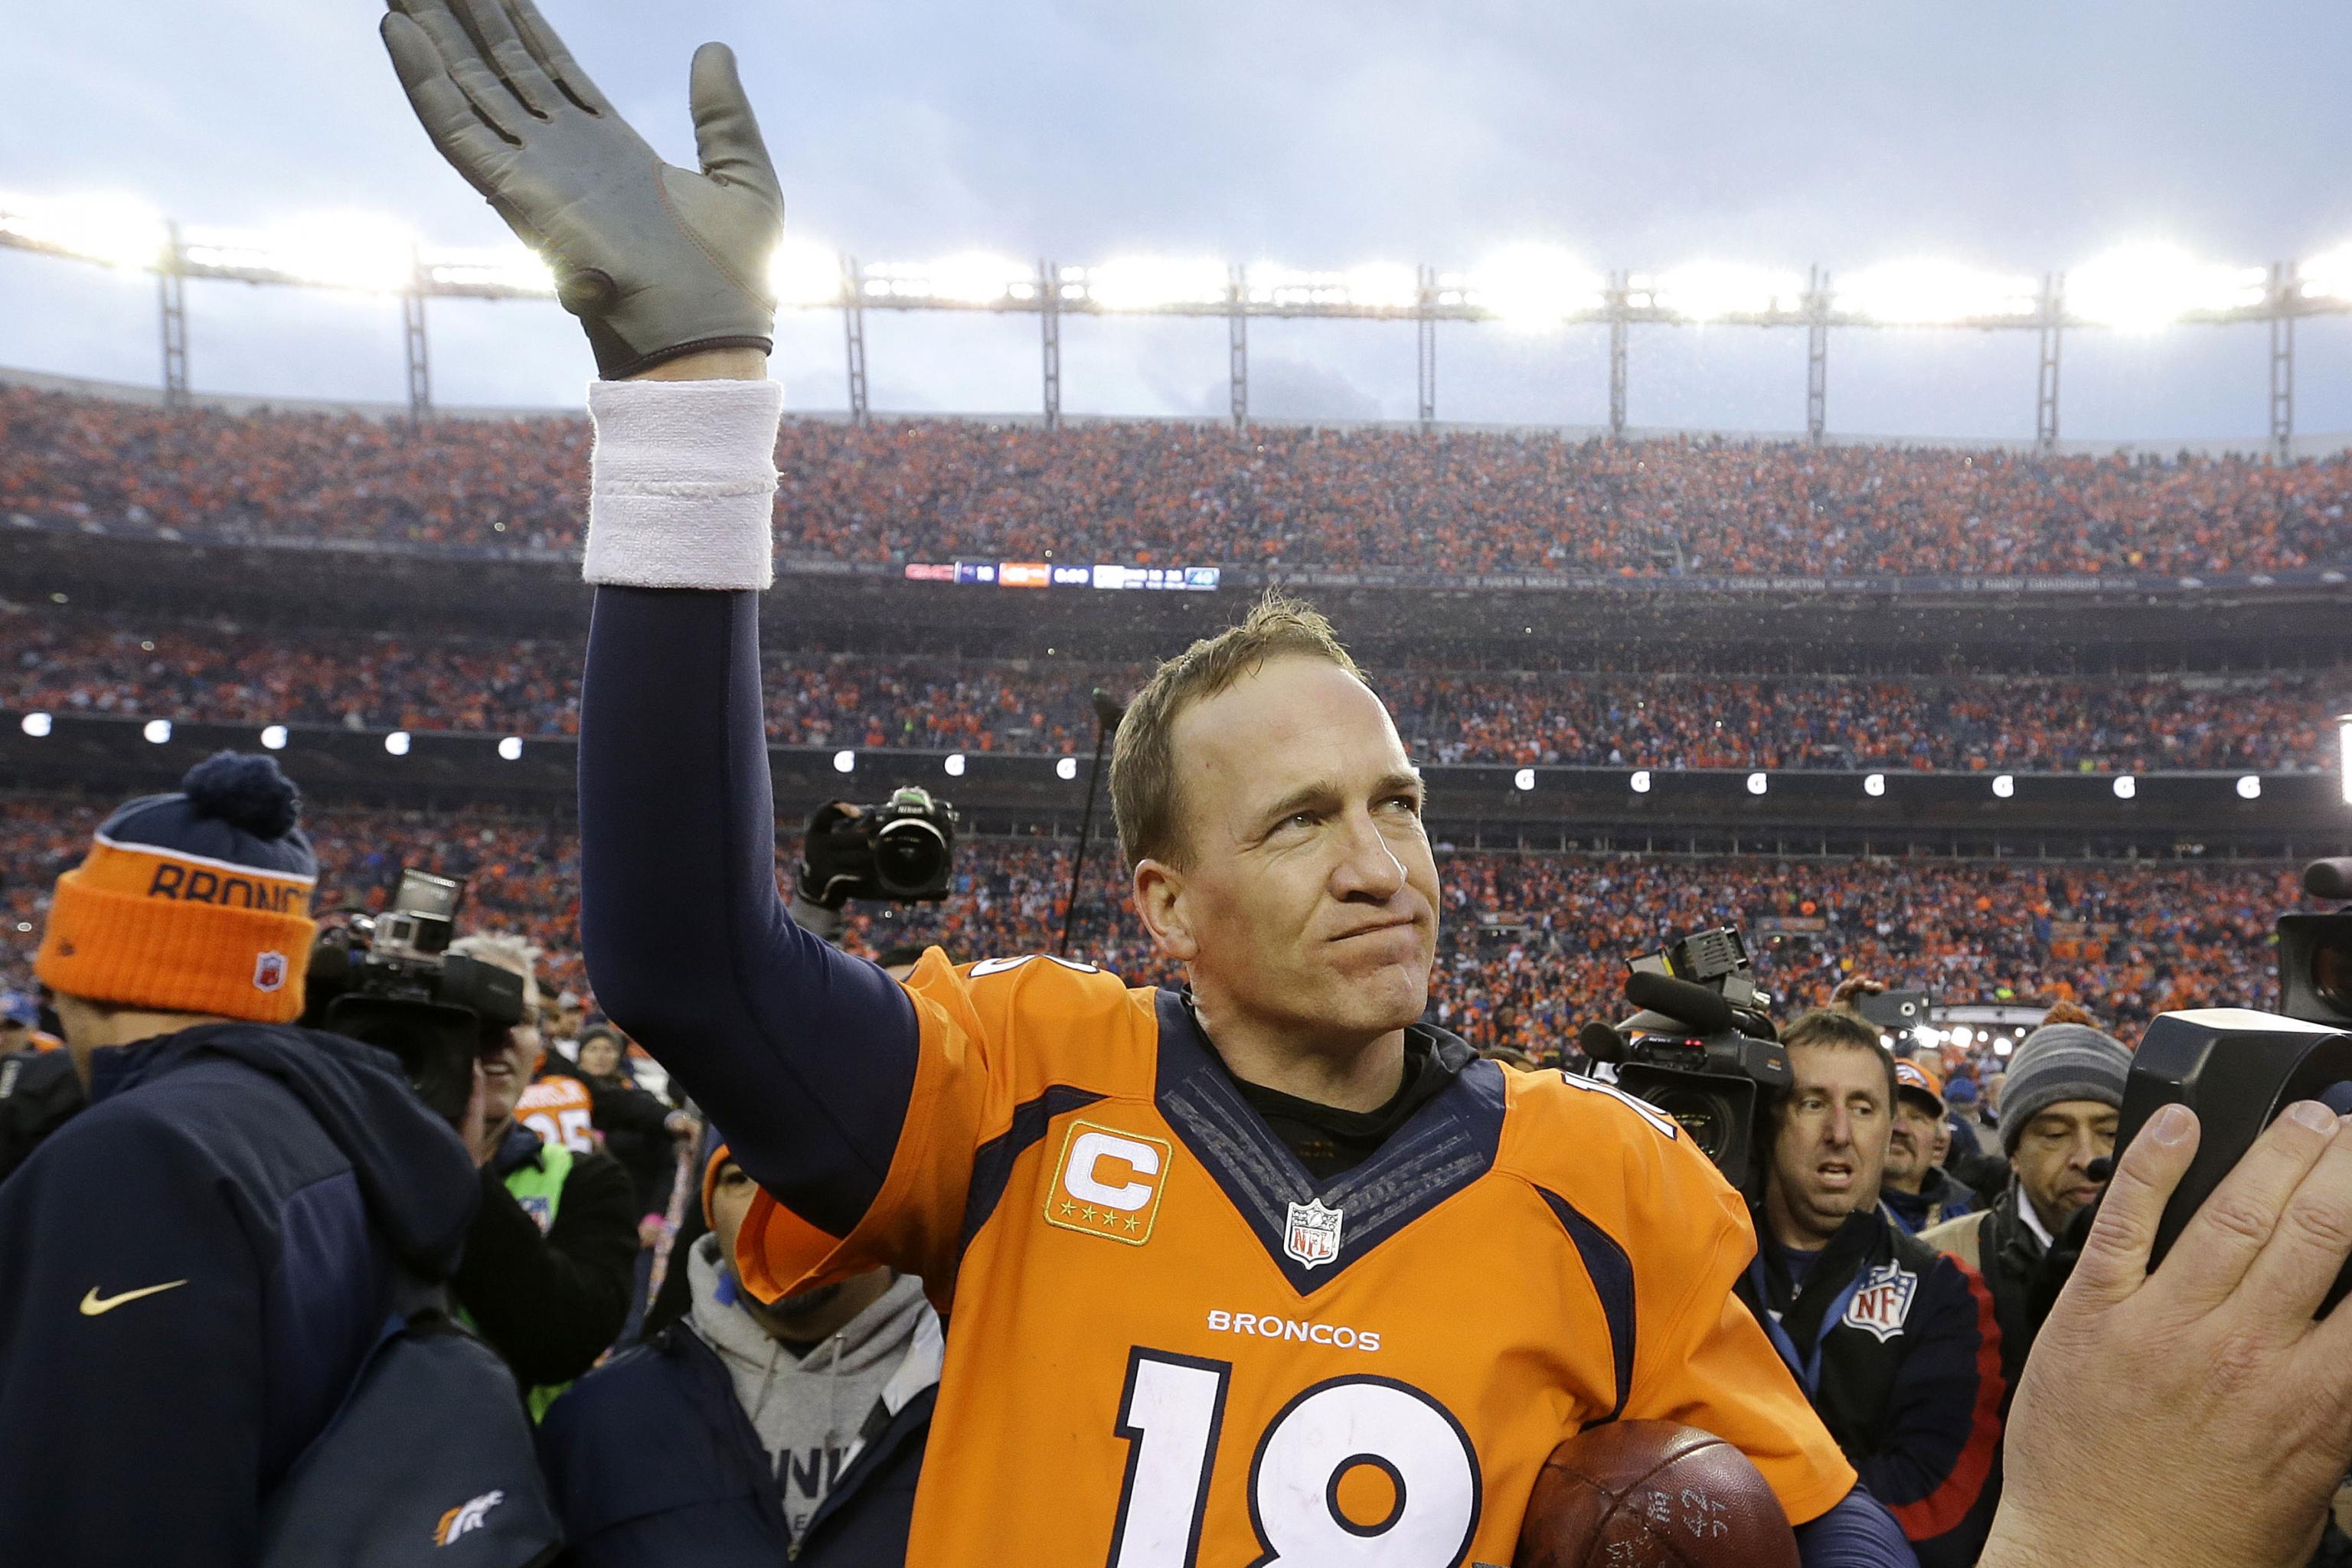 Peyton Manning Becomes 5th QB to Throw 1,000 Yards in Super Bowl